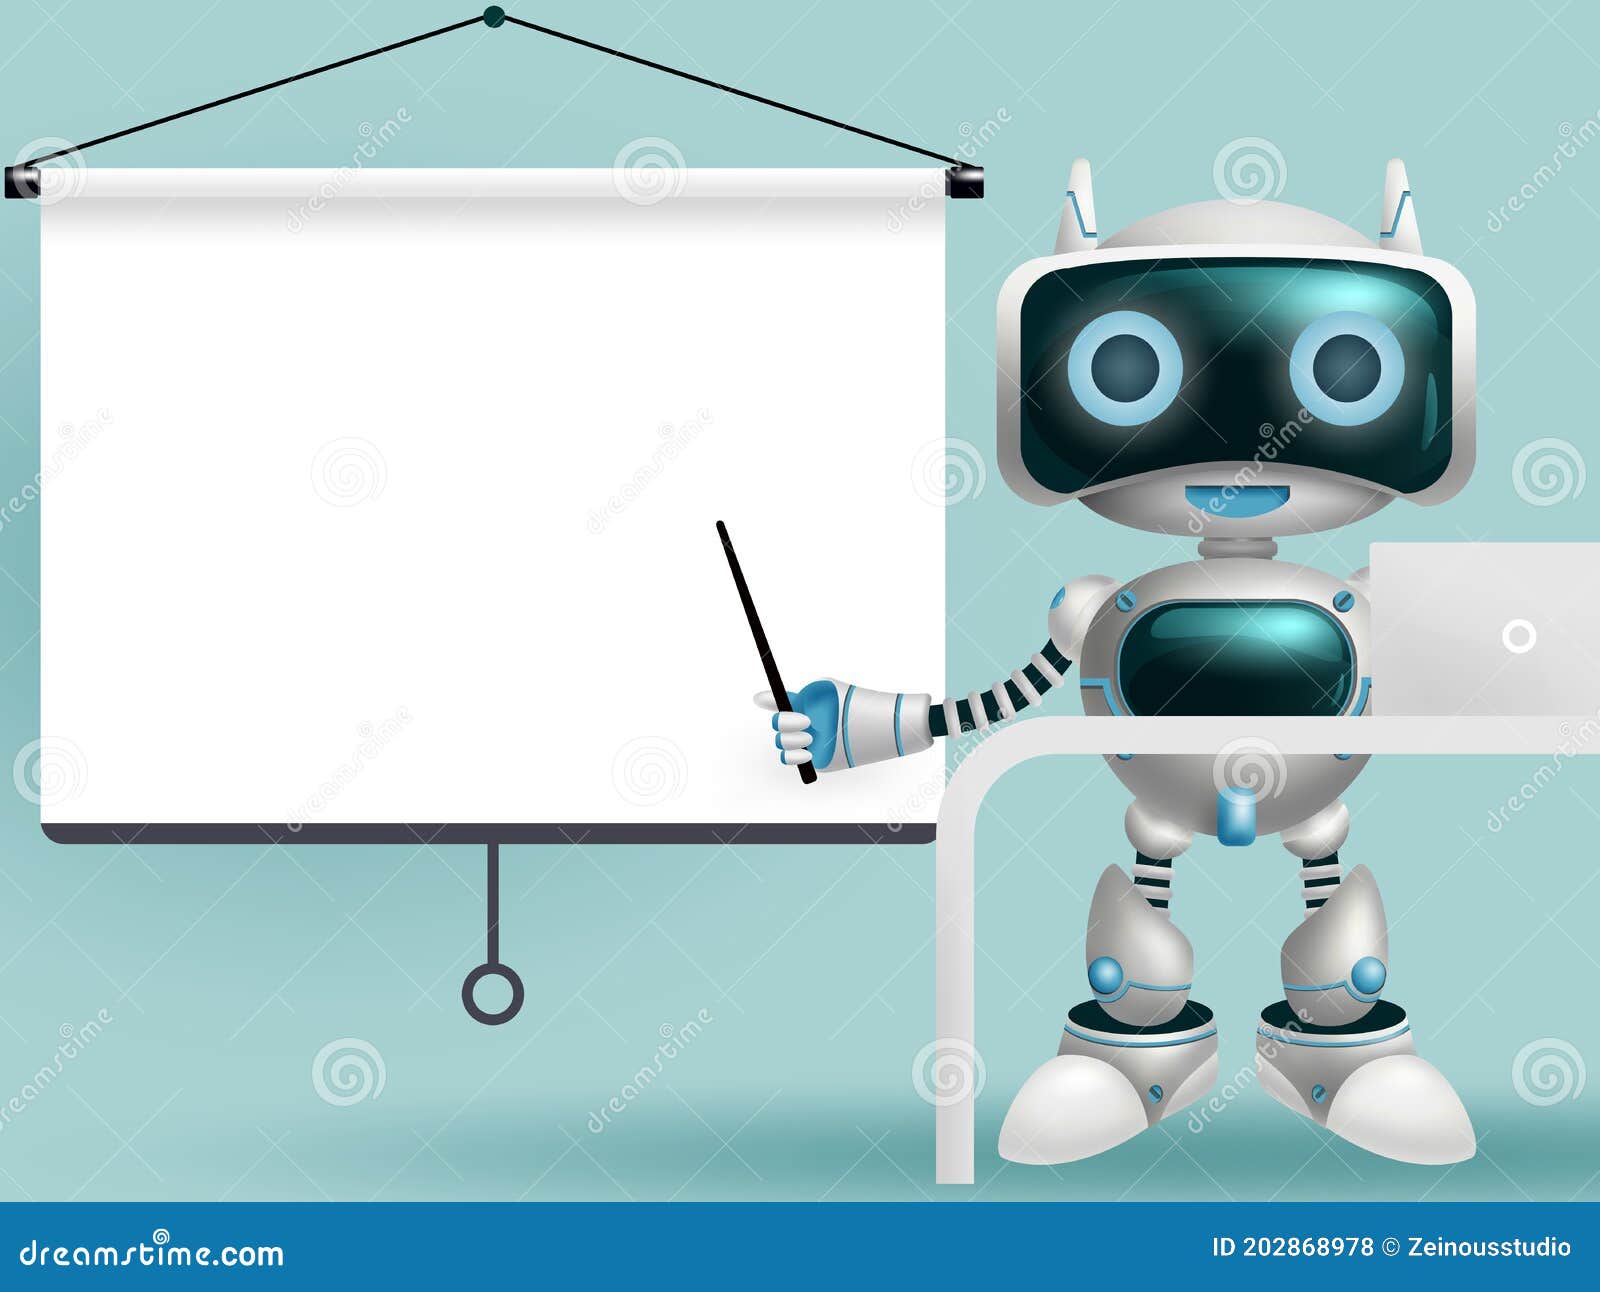 Robot Character Presentation Vector Background Design. Robotic 3d Character  Presenting Empty White Projector Screen Board Element. Stock Vector -  Illustration of robot, modern: 202868978